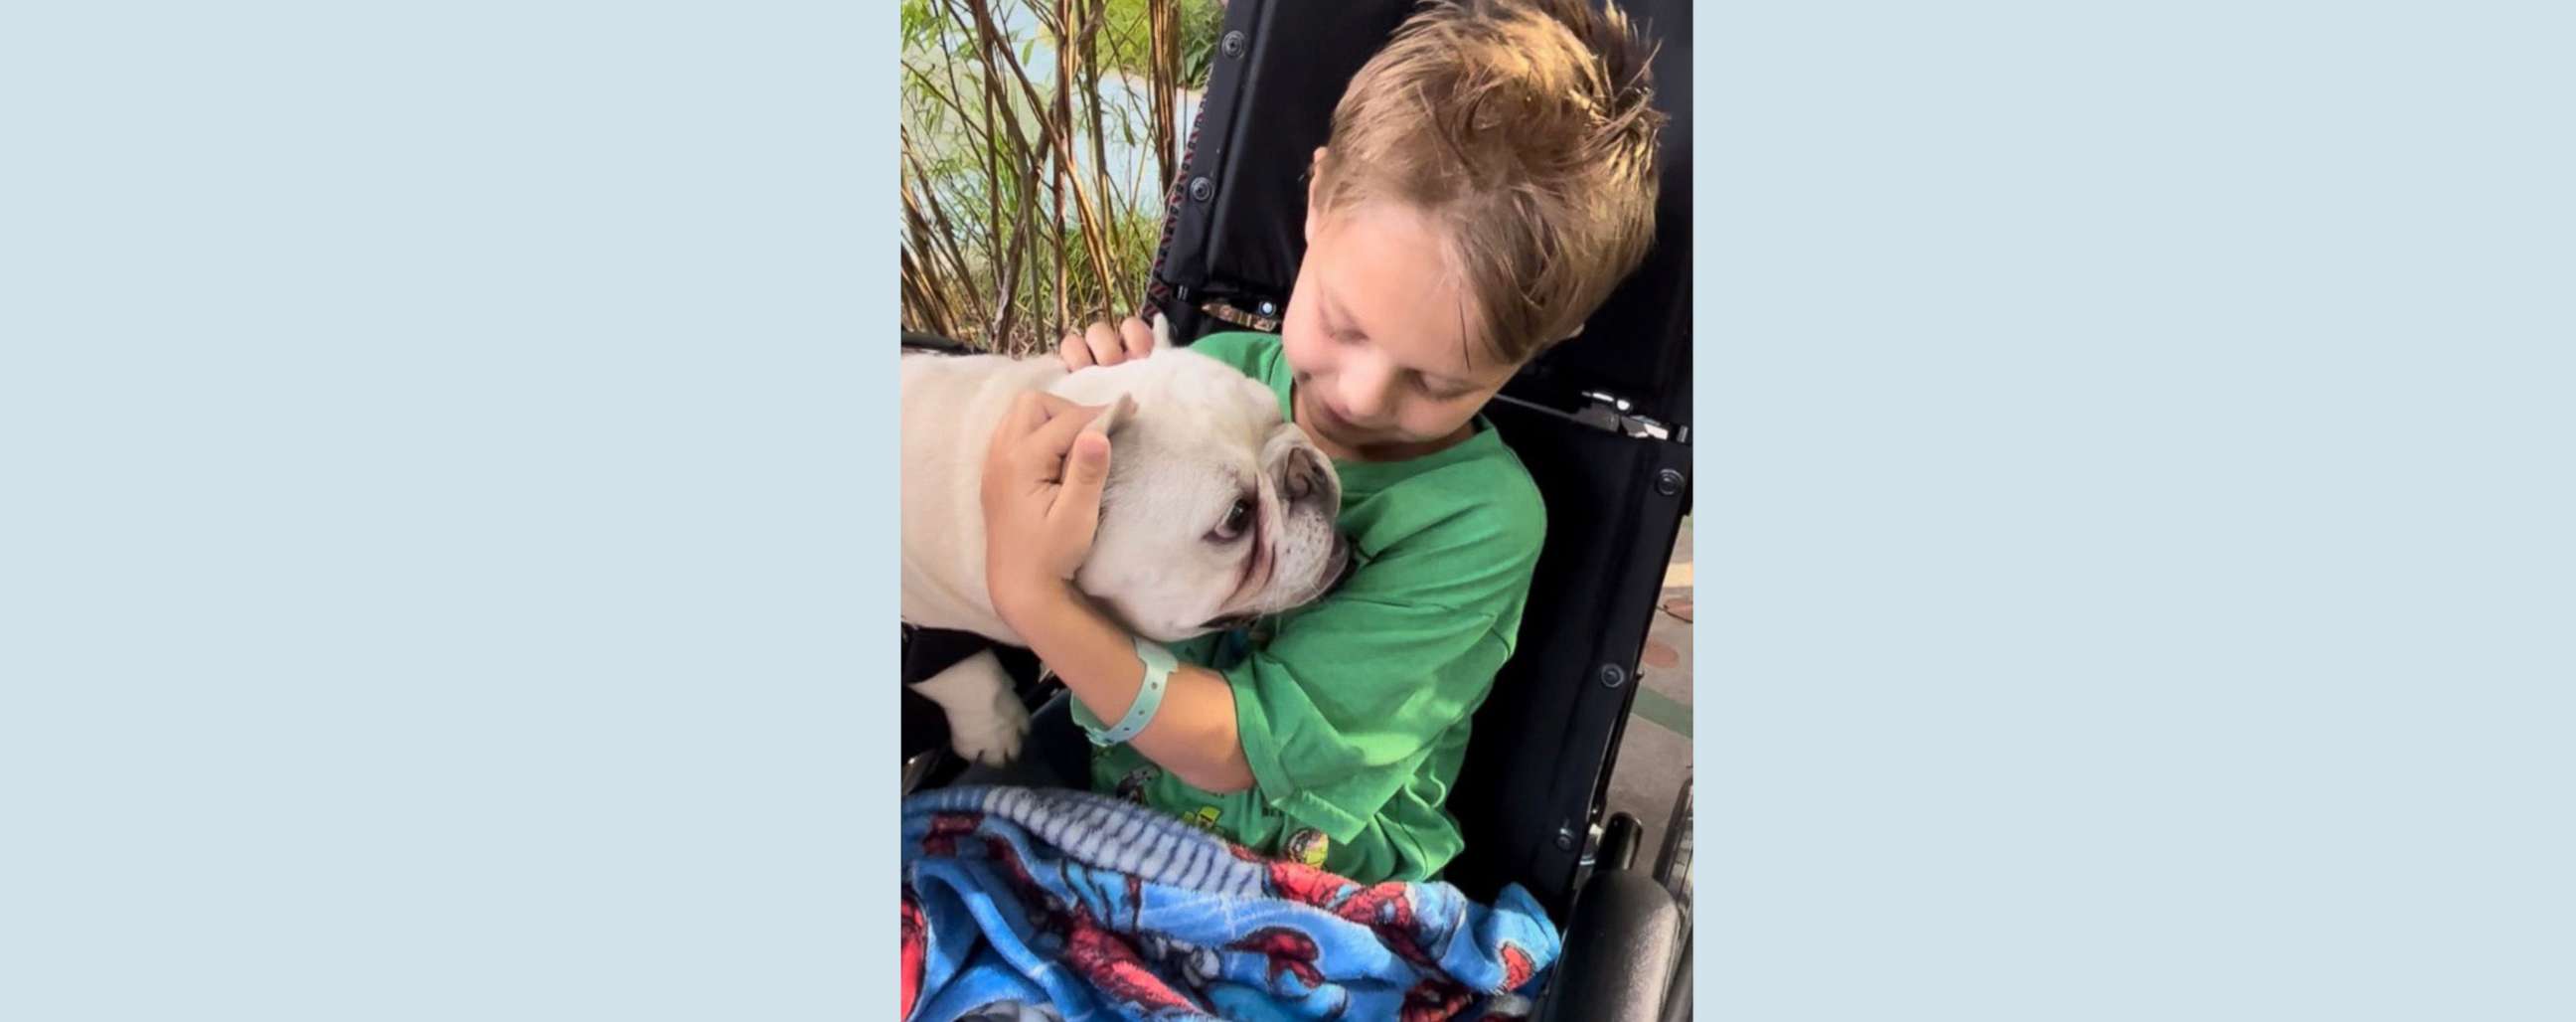 PHOTO: Cooper Roberts, who was paralyzed in the July 4th parade attack in Highland Park, Illinois, was reunited for the first time since the shooting with his dog, George.